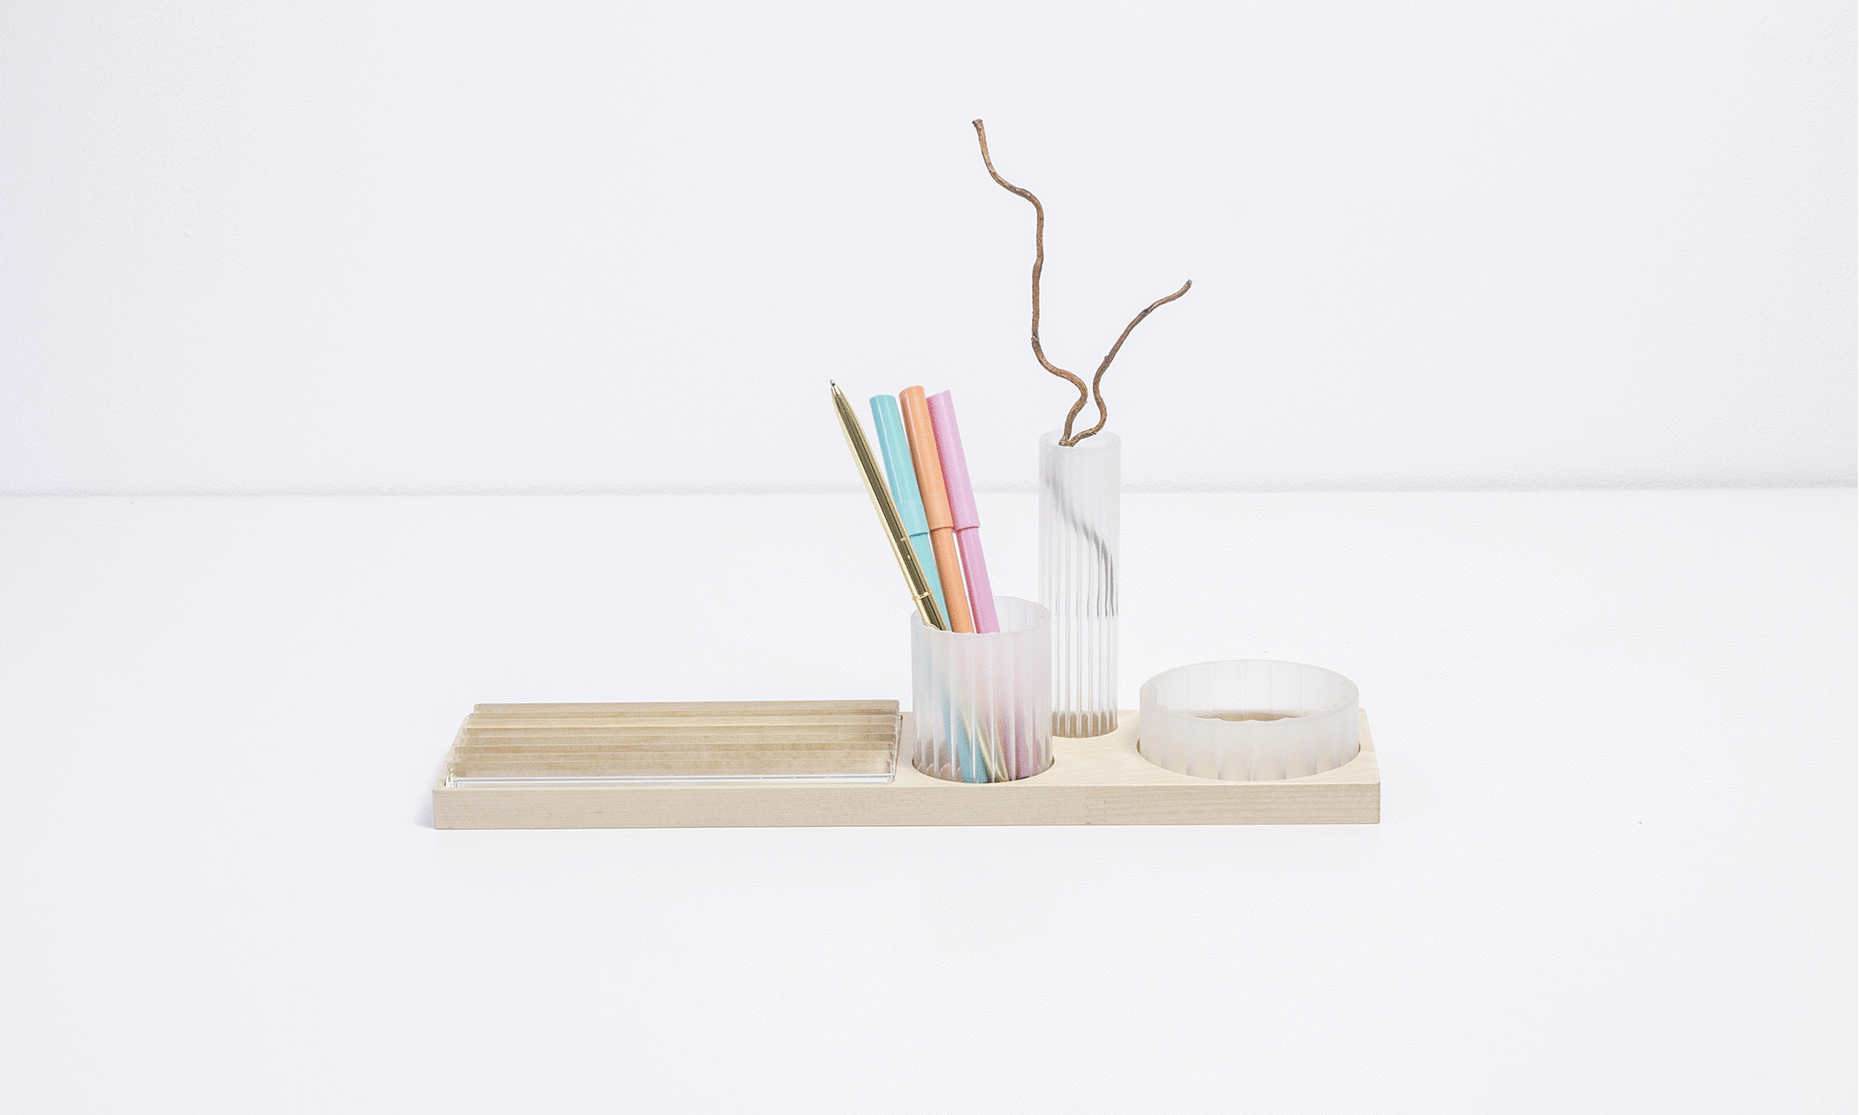 A modular stand for stationery inspired by industrial aesthetics. It is made of solid wood in combination with prefabricated parts from technical glass Simax. Designed by Jiri Krejcirik.